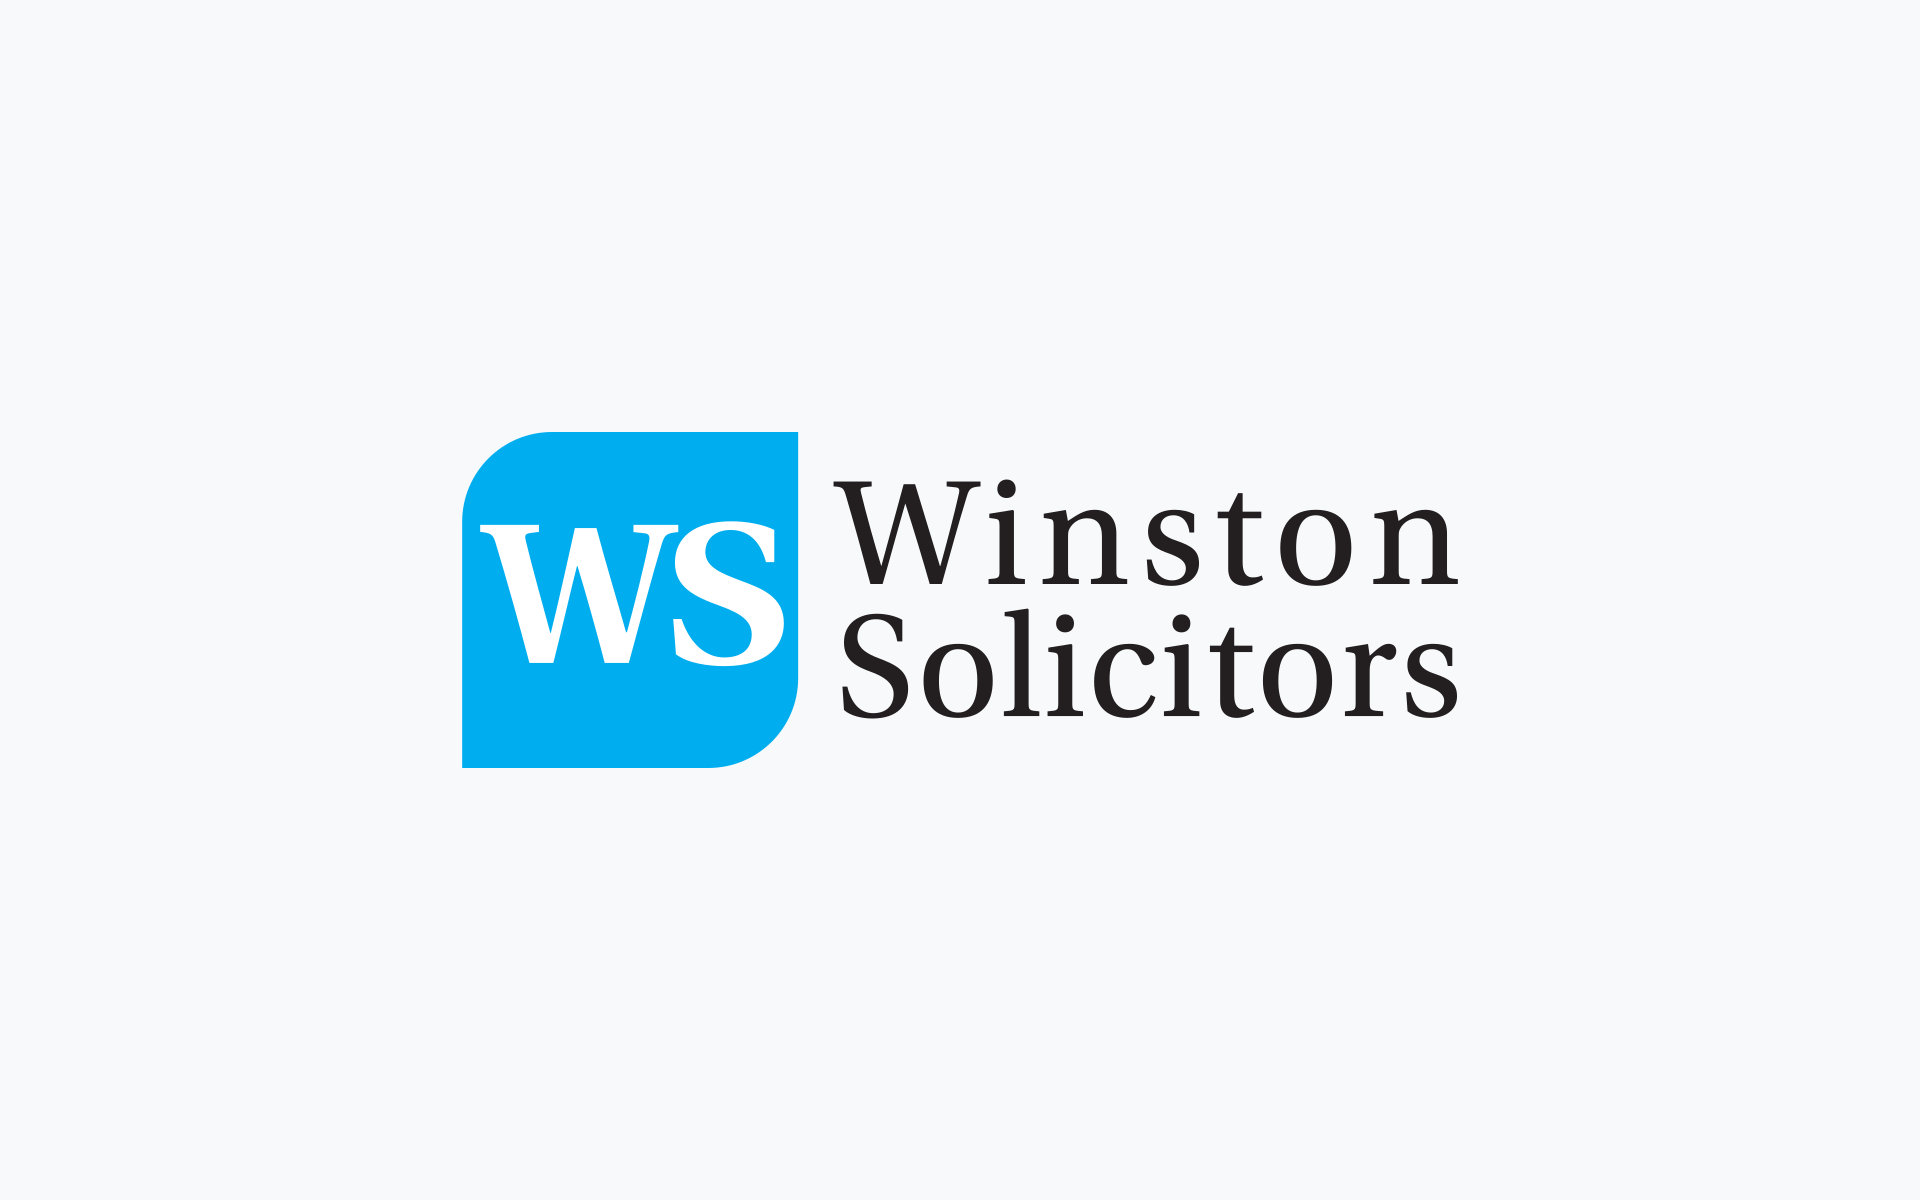 www.winstonsolicitors.co.uk